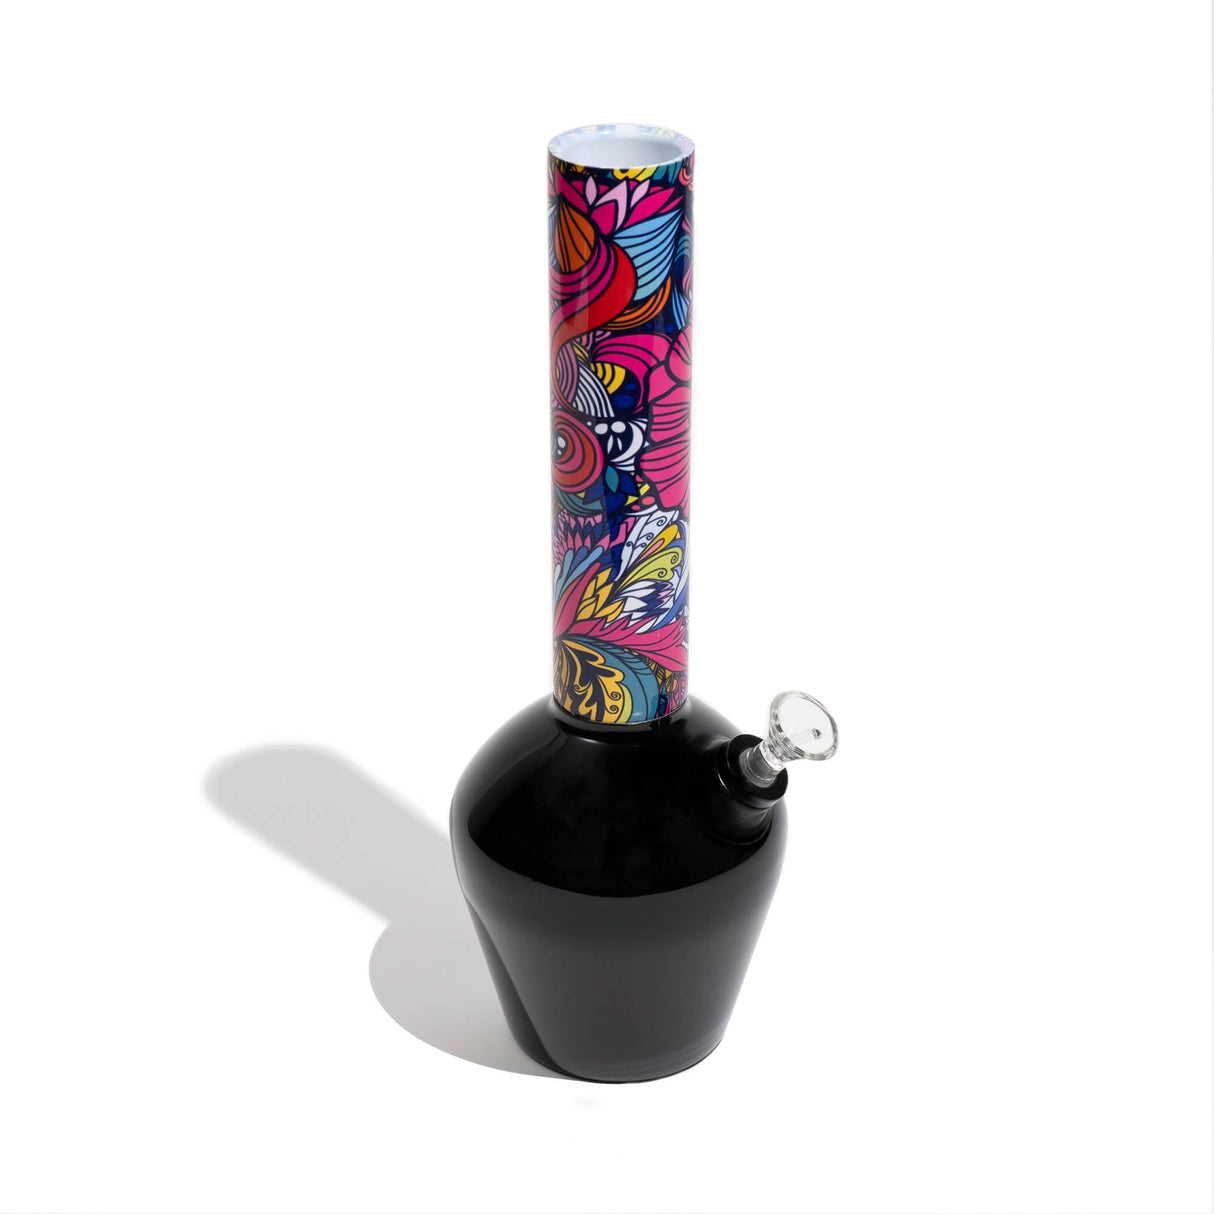 Chill Steel Pipes Mix & Match Series bong with a gloss black base and colorful patterned tube, top view